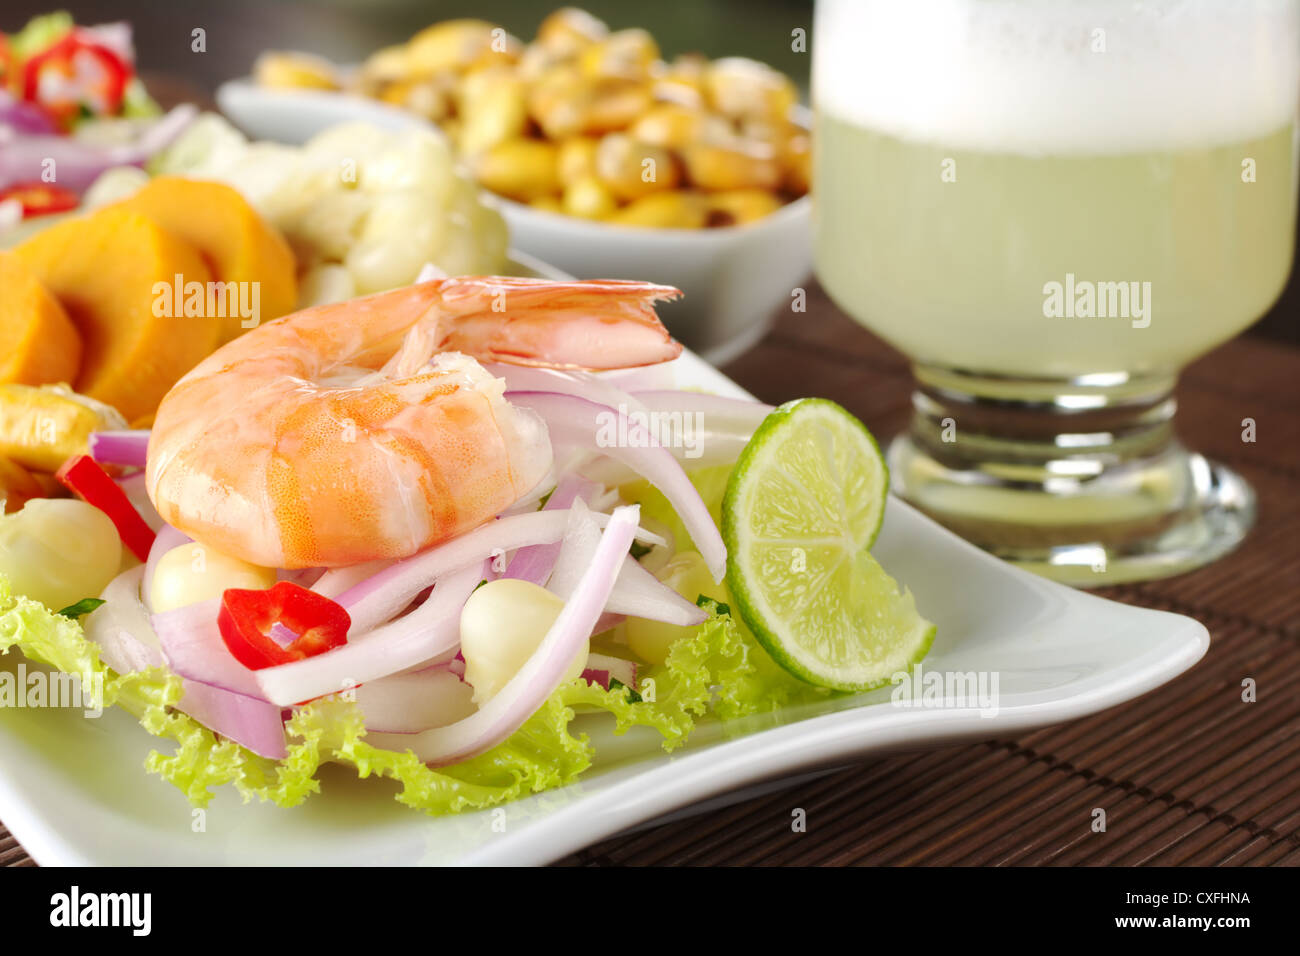 Peruvian king prawn ceviche with sweet potatoes, corn, cancha (fried corn) and the Peruvian cocktail called Pisco Sour Stock Photo